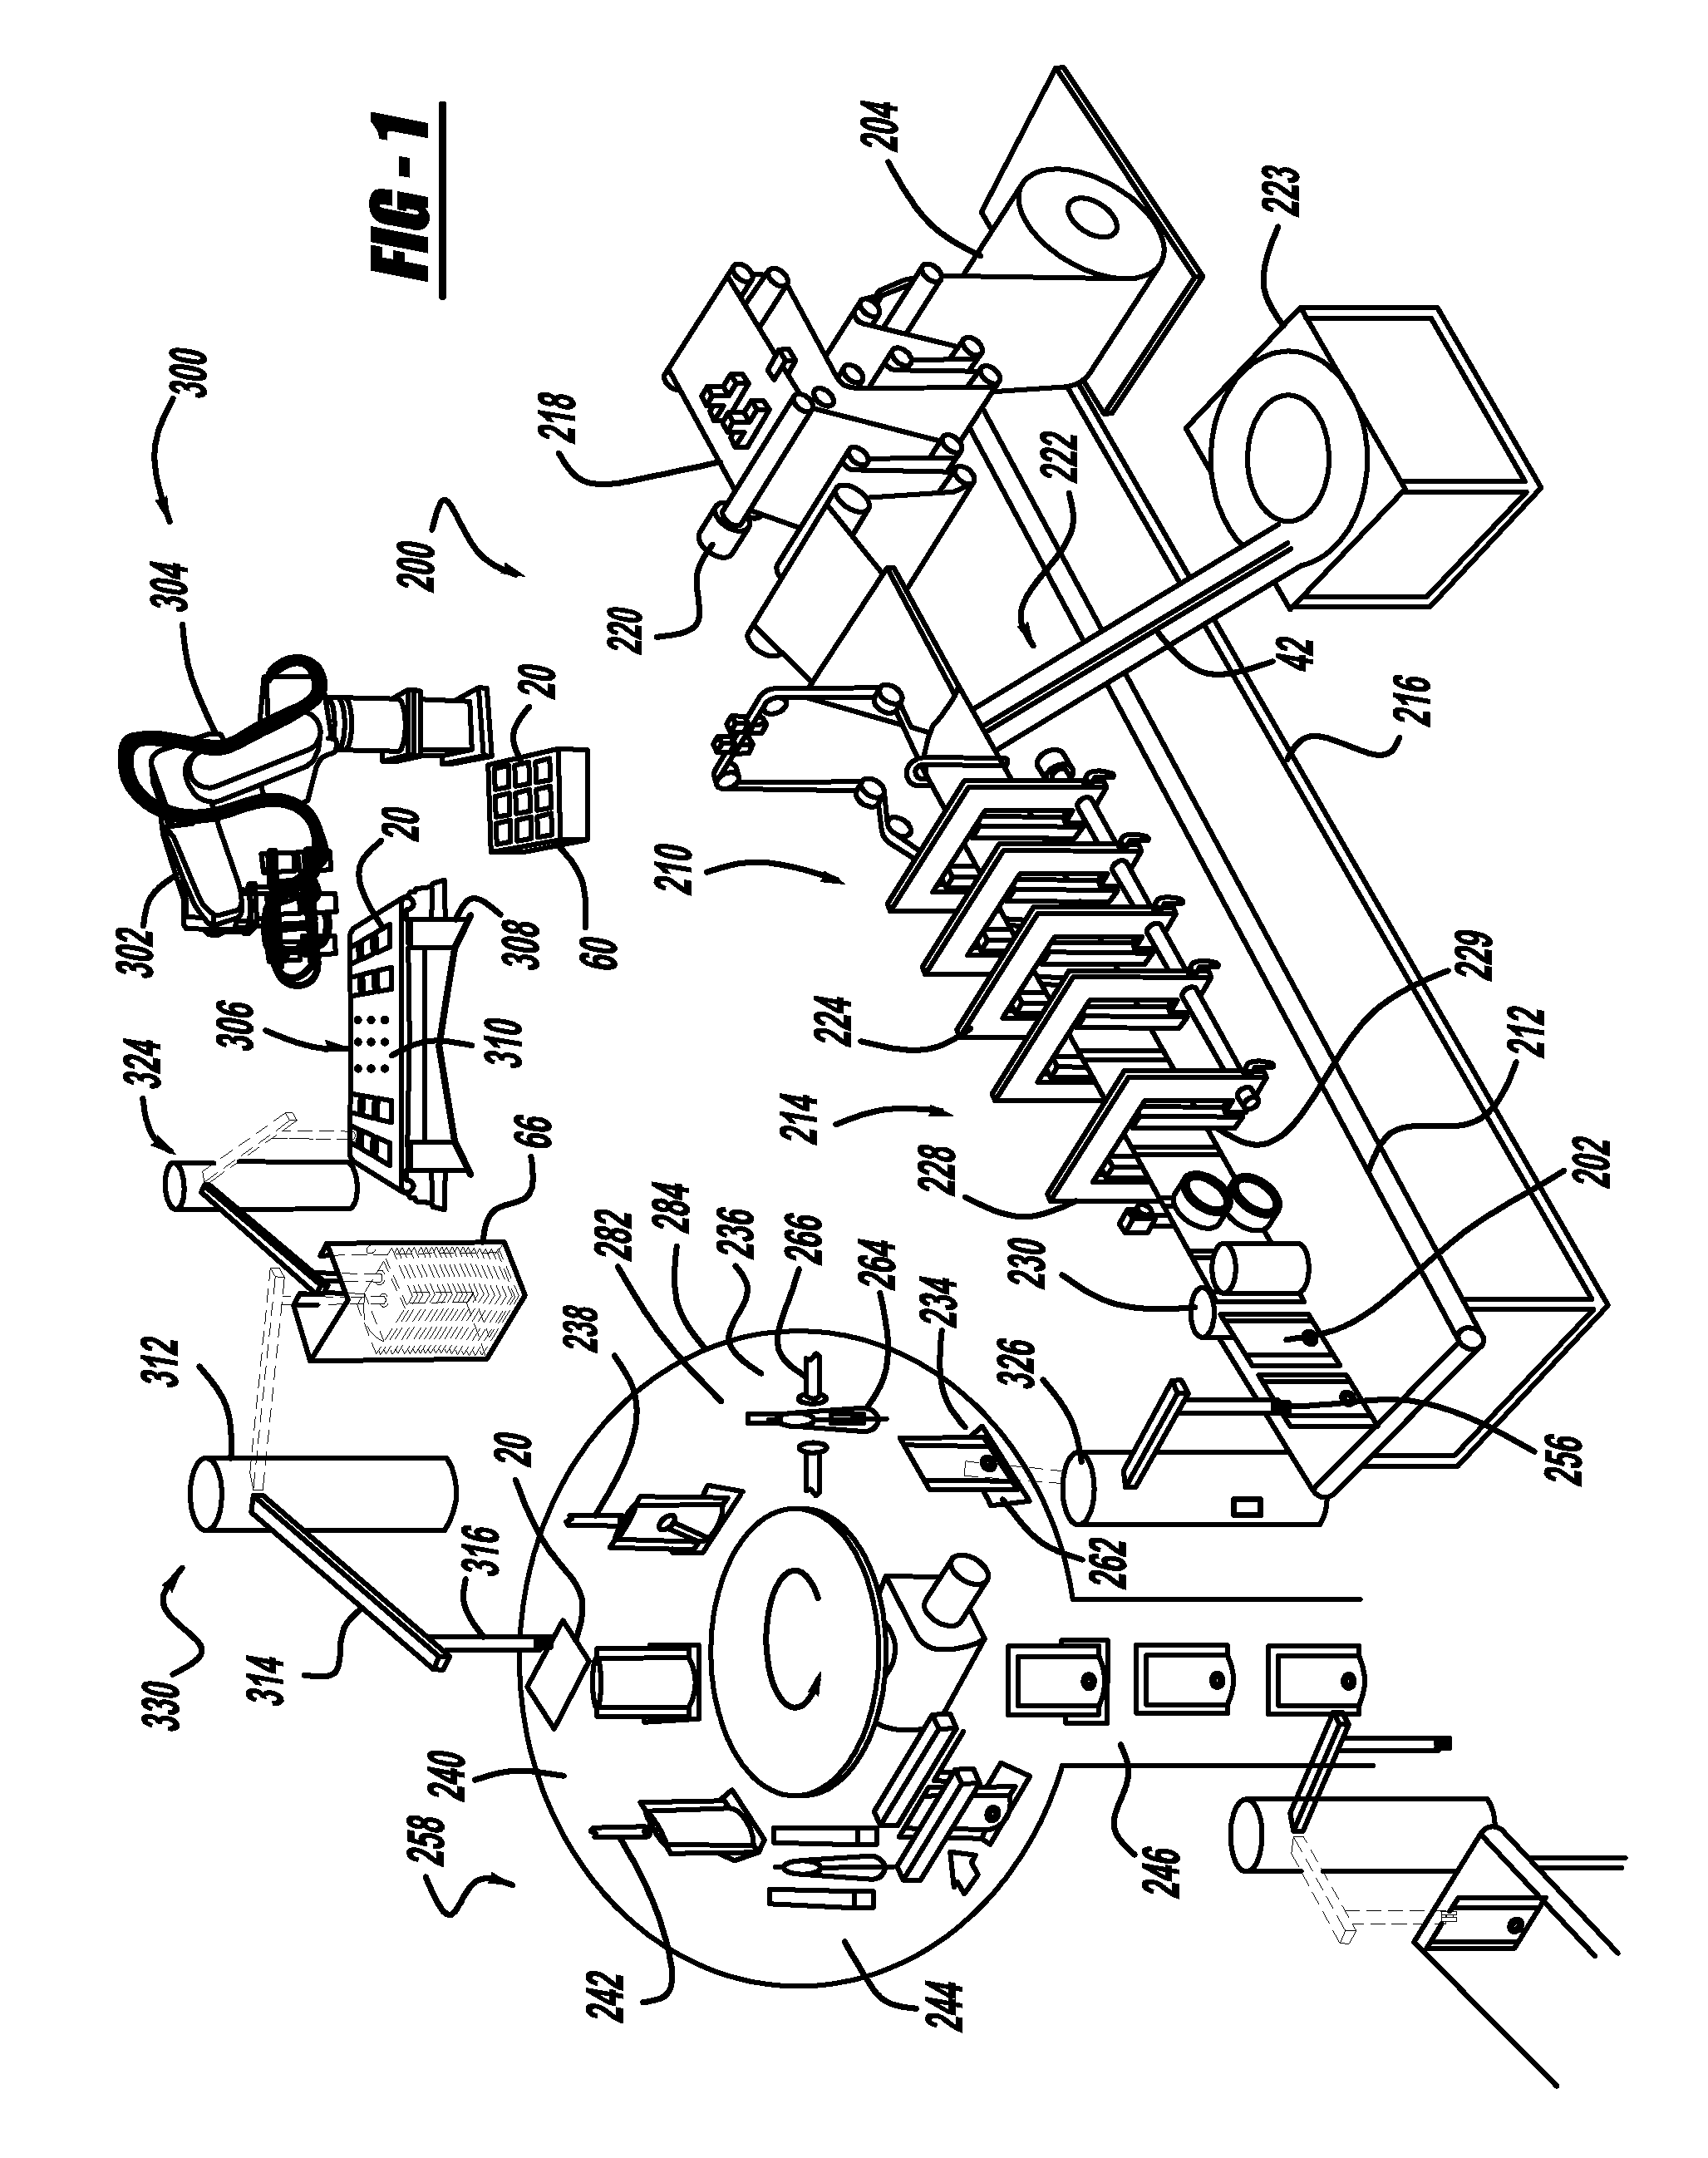 System, method and machine for continuous loading of a product